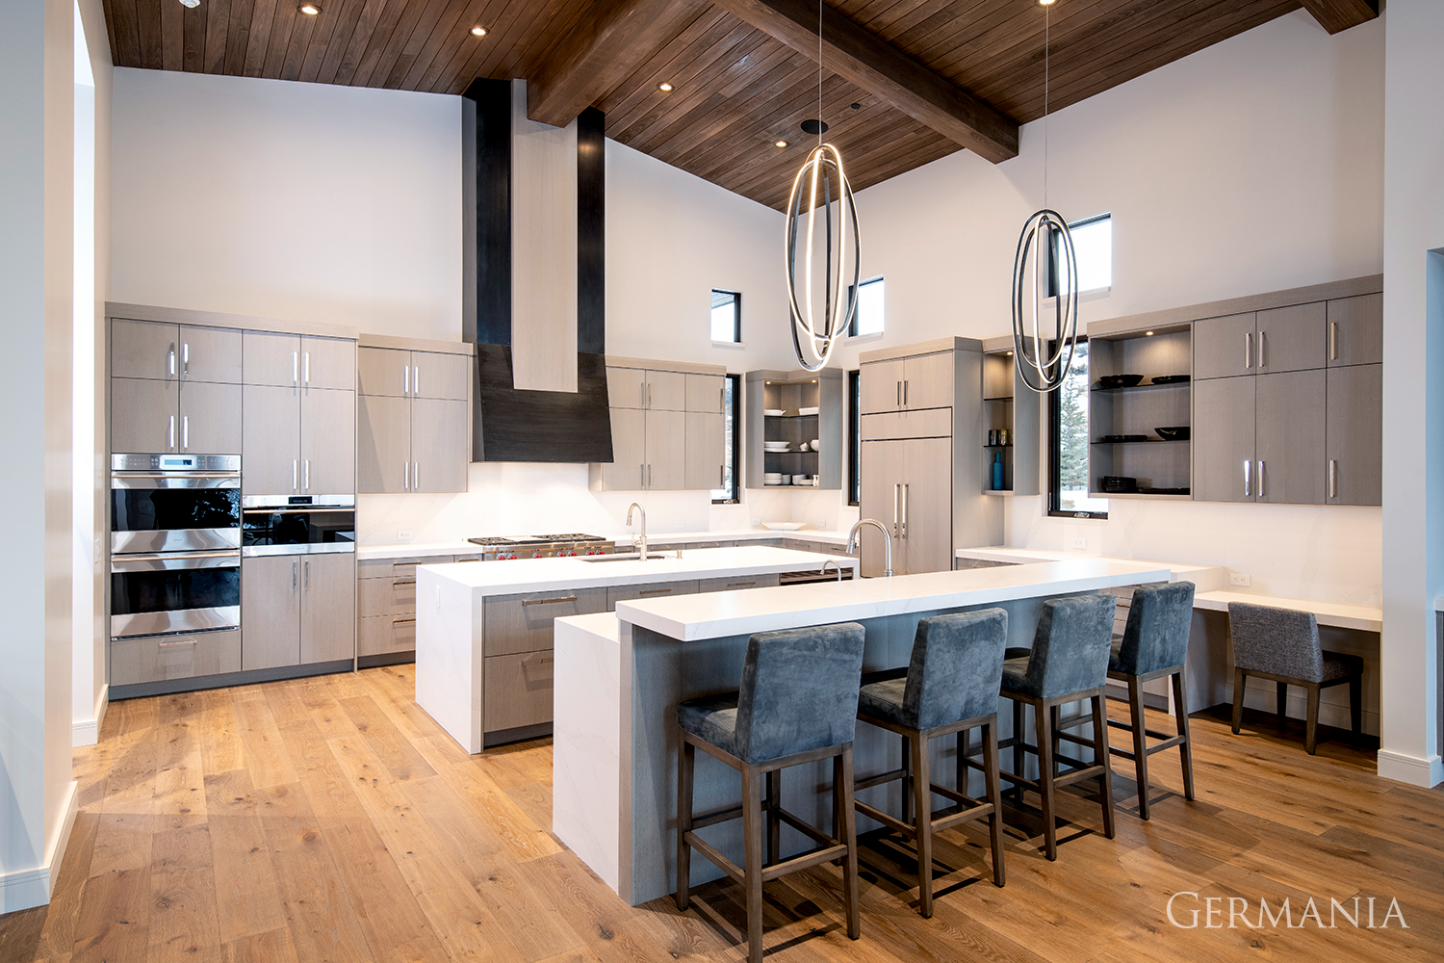 High-end, custom-built, luxury kitchen in Park City, UT with stunning light fixtures, white marble counters, and dark wood ceiling.